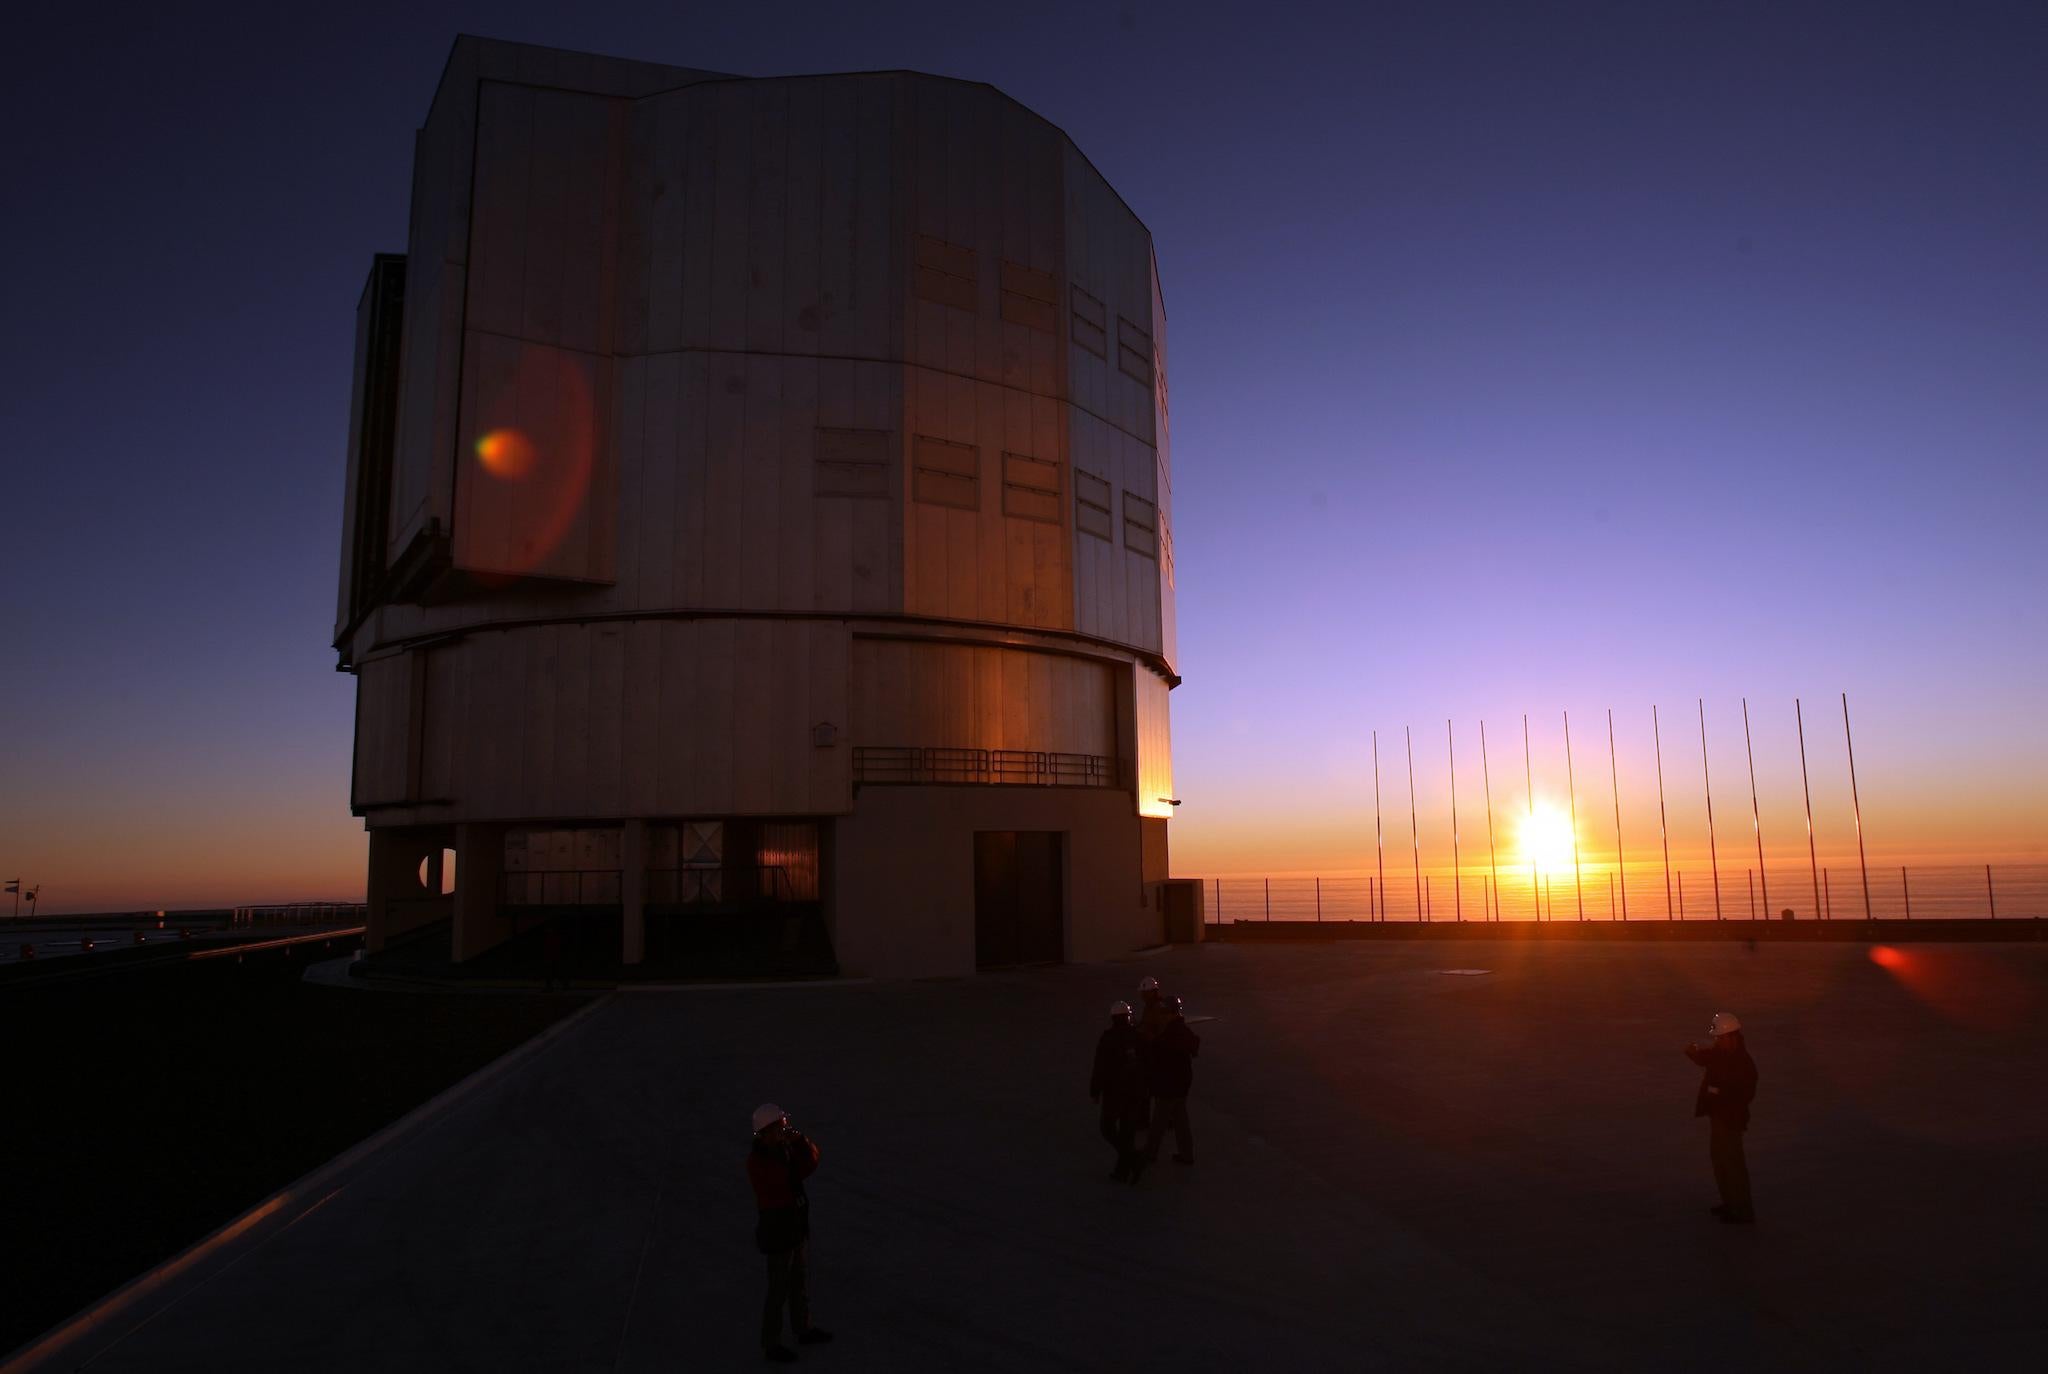 The Paranal Observatory, run by the intergovernmental European Southern Observatory (ESO) in the Atacama Desert, northern Chile